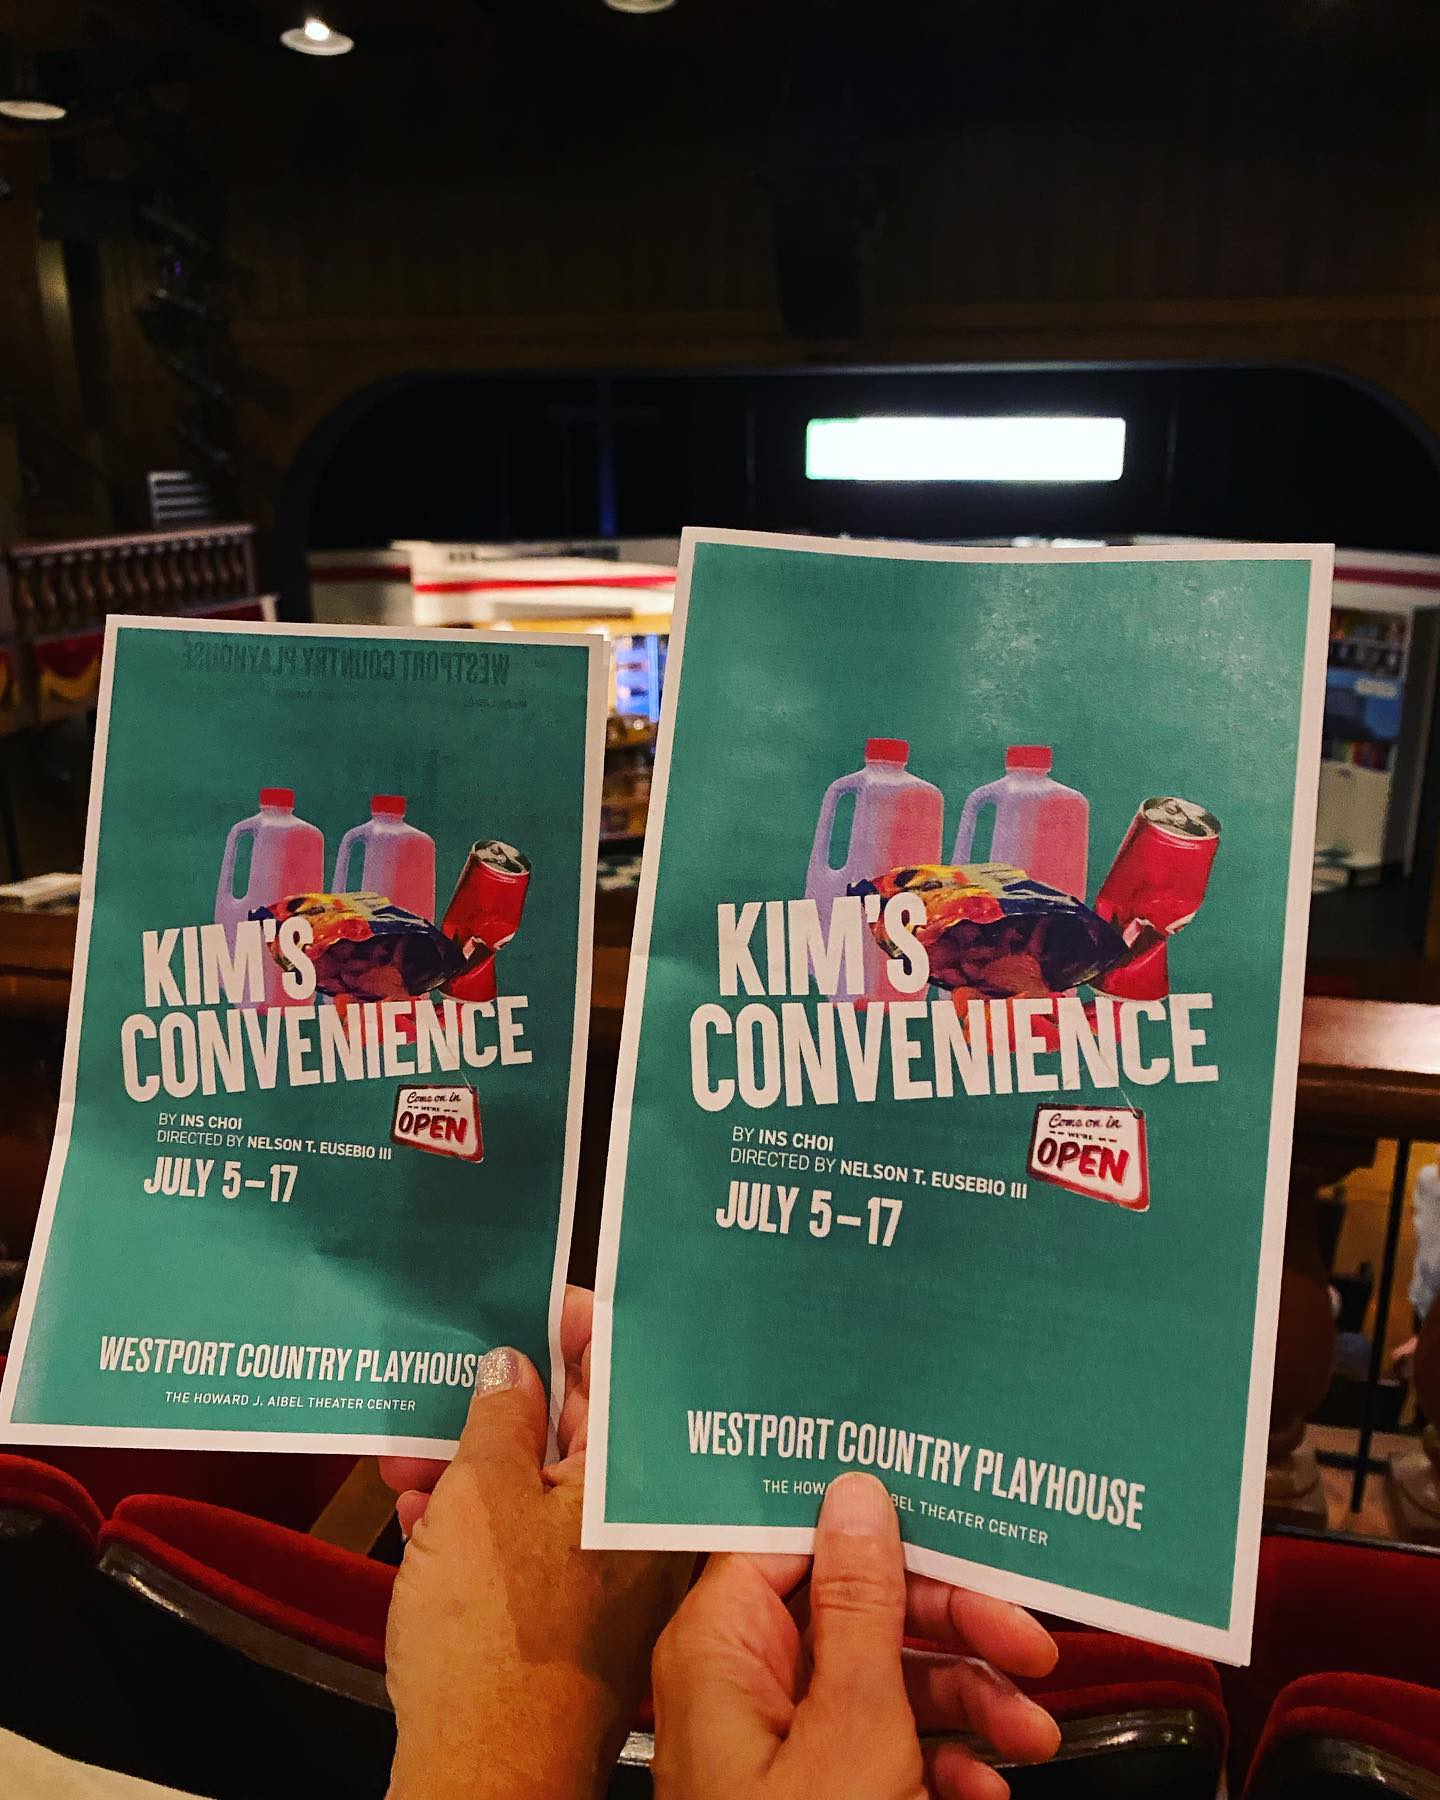 Joyful and touching! So wonderful to join a full house @wcplayhouse to see Kim’s Convenience. As a fan of this TV series it was a pleasure to see the original source material brought to life with care, finesse and a stellar cast! @jengansblankfein and I talked afterwards about family expectations, and the gifts parents give their children that can go unnoticed.  #westportcountryplayhouse #localtheatre #westportct #playwriting #kimsconvenienceplay #ilovetheatre #dinnerandashow